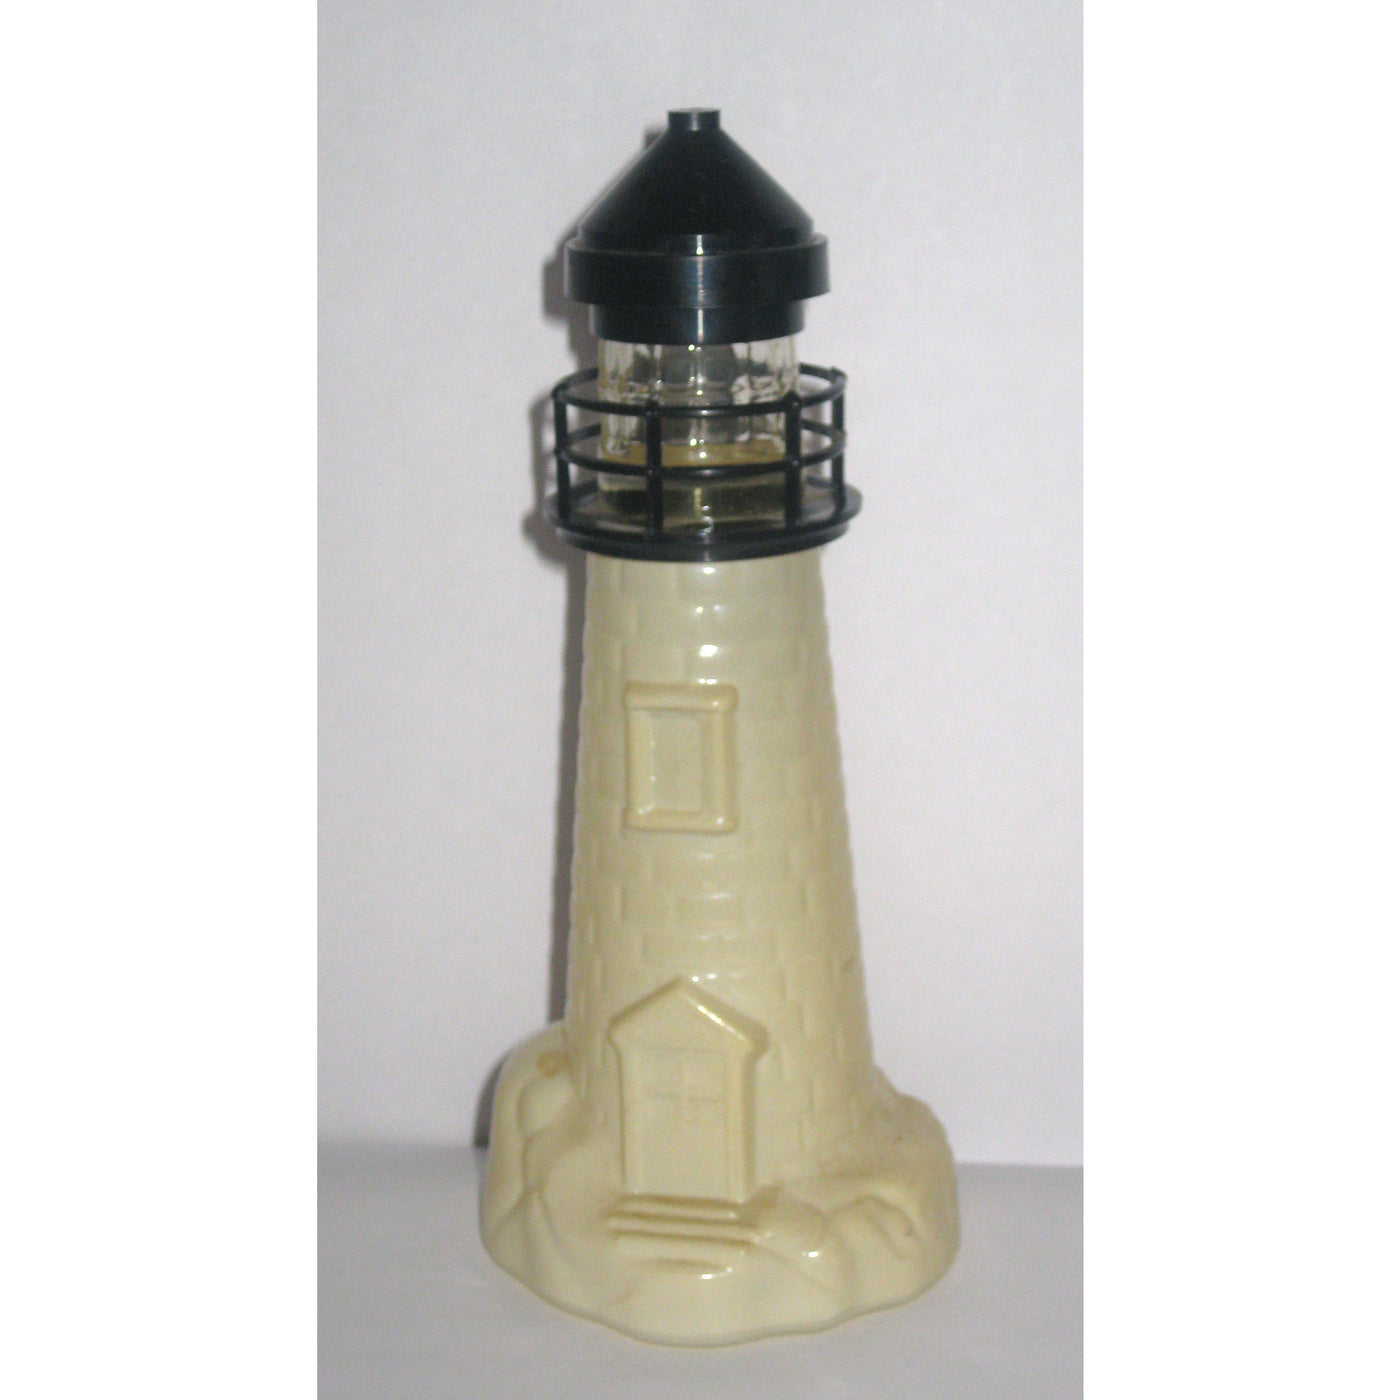 Vintage Old Spice After Shave Lighthouse Decanter By Shulton